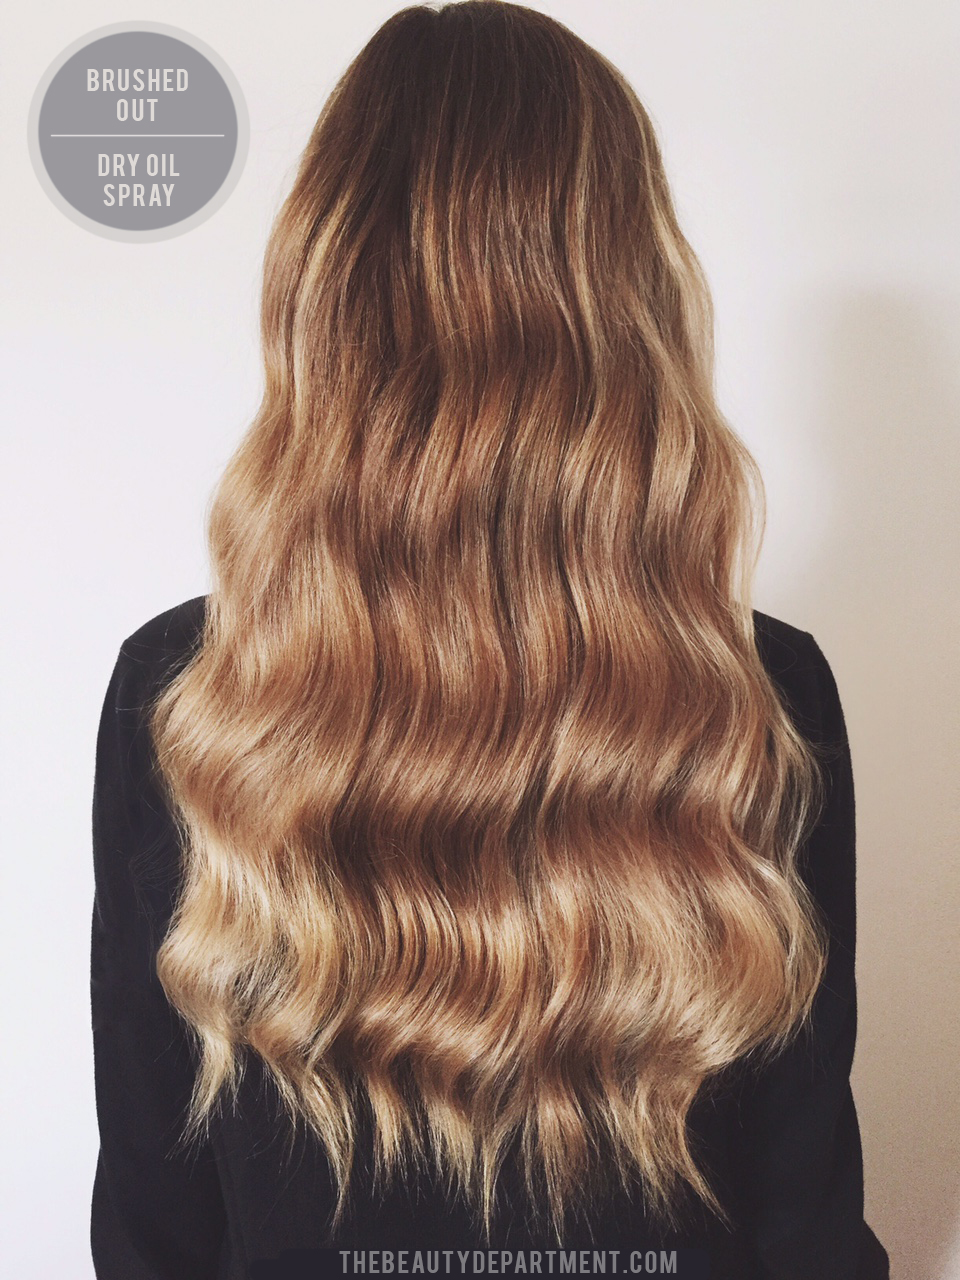 The Beauty Department: Your Daily Dose of Pretty. - 5 WAYS TO WAND WAVES